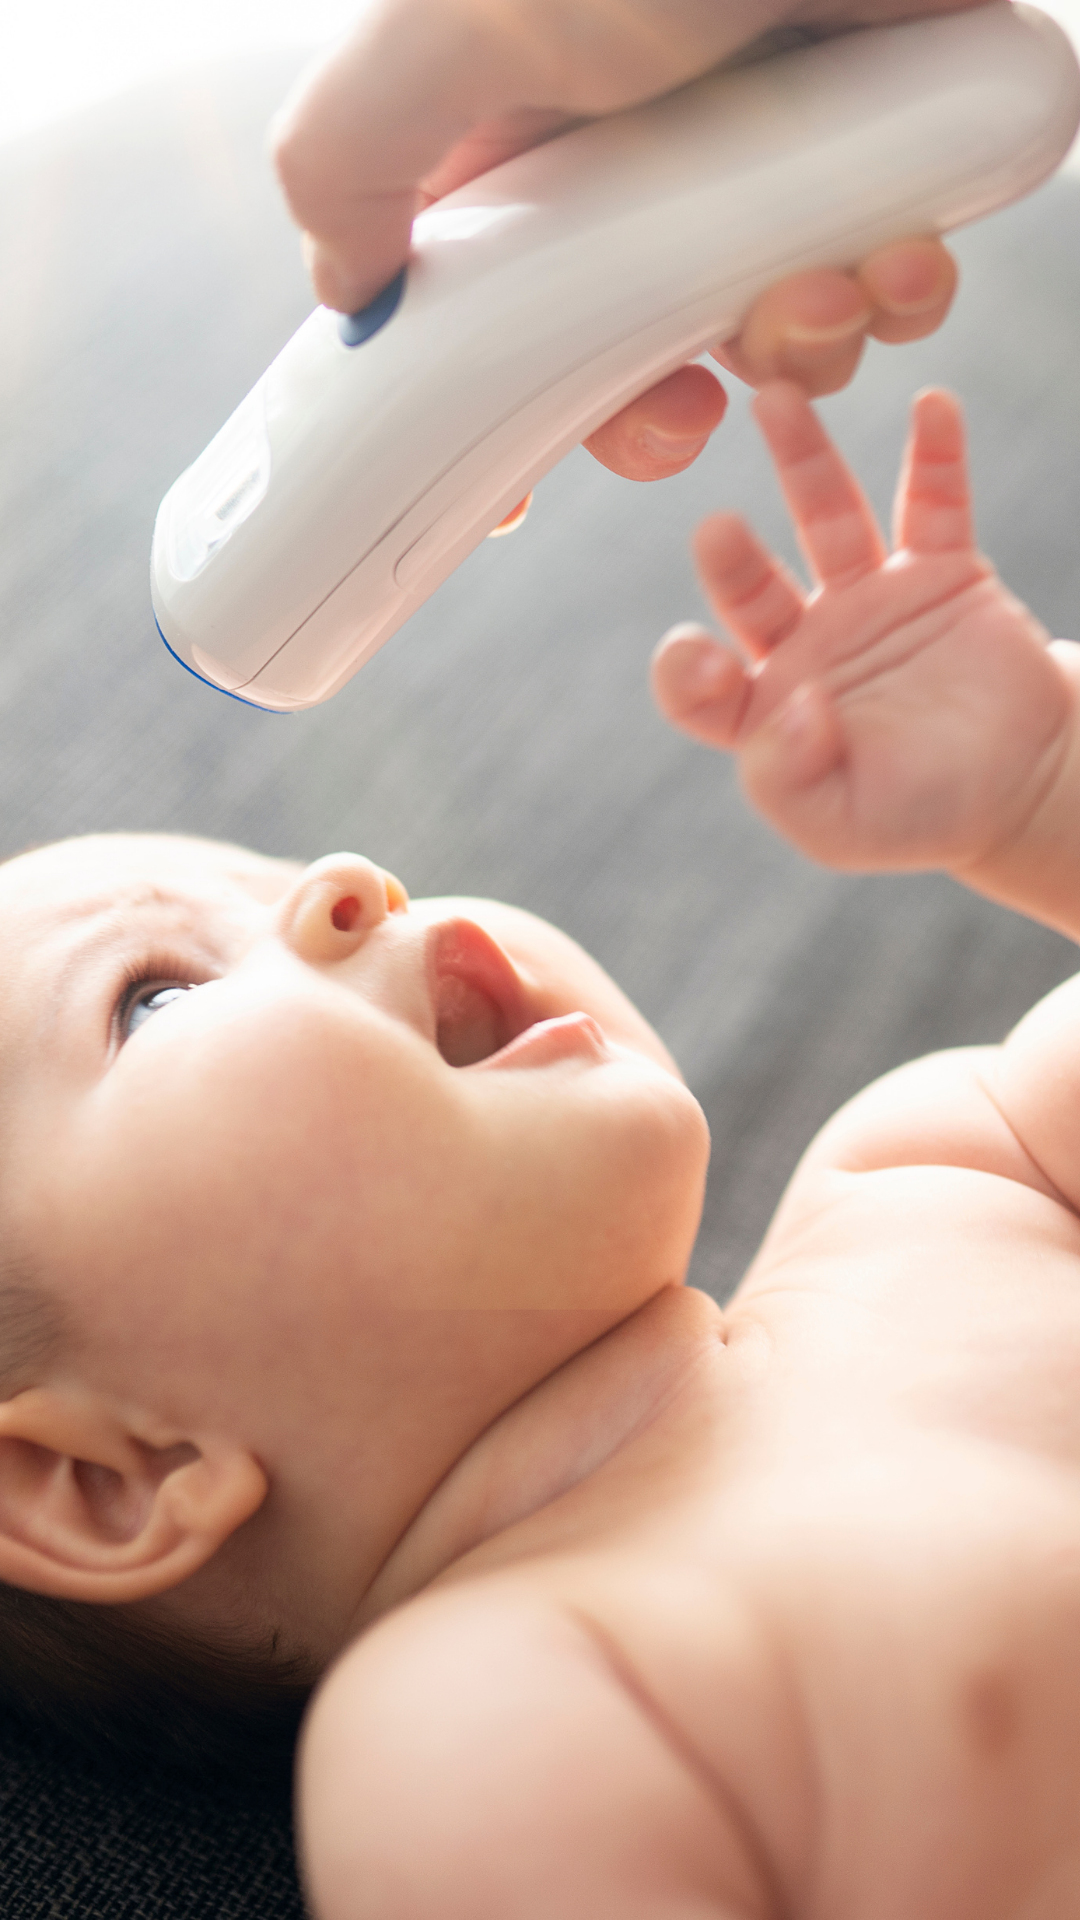 5 Qualities You Want Your Baby Thermometer to Have